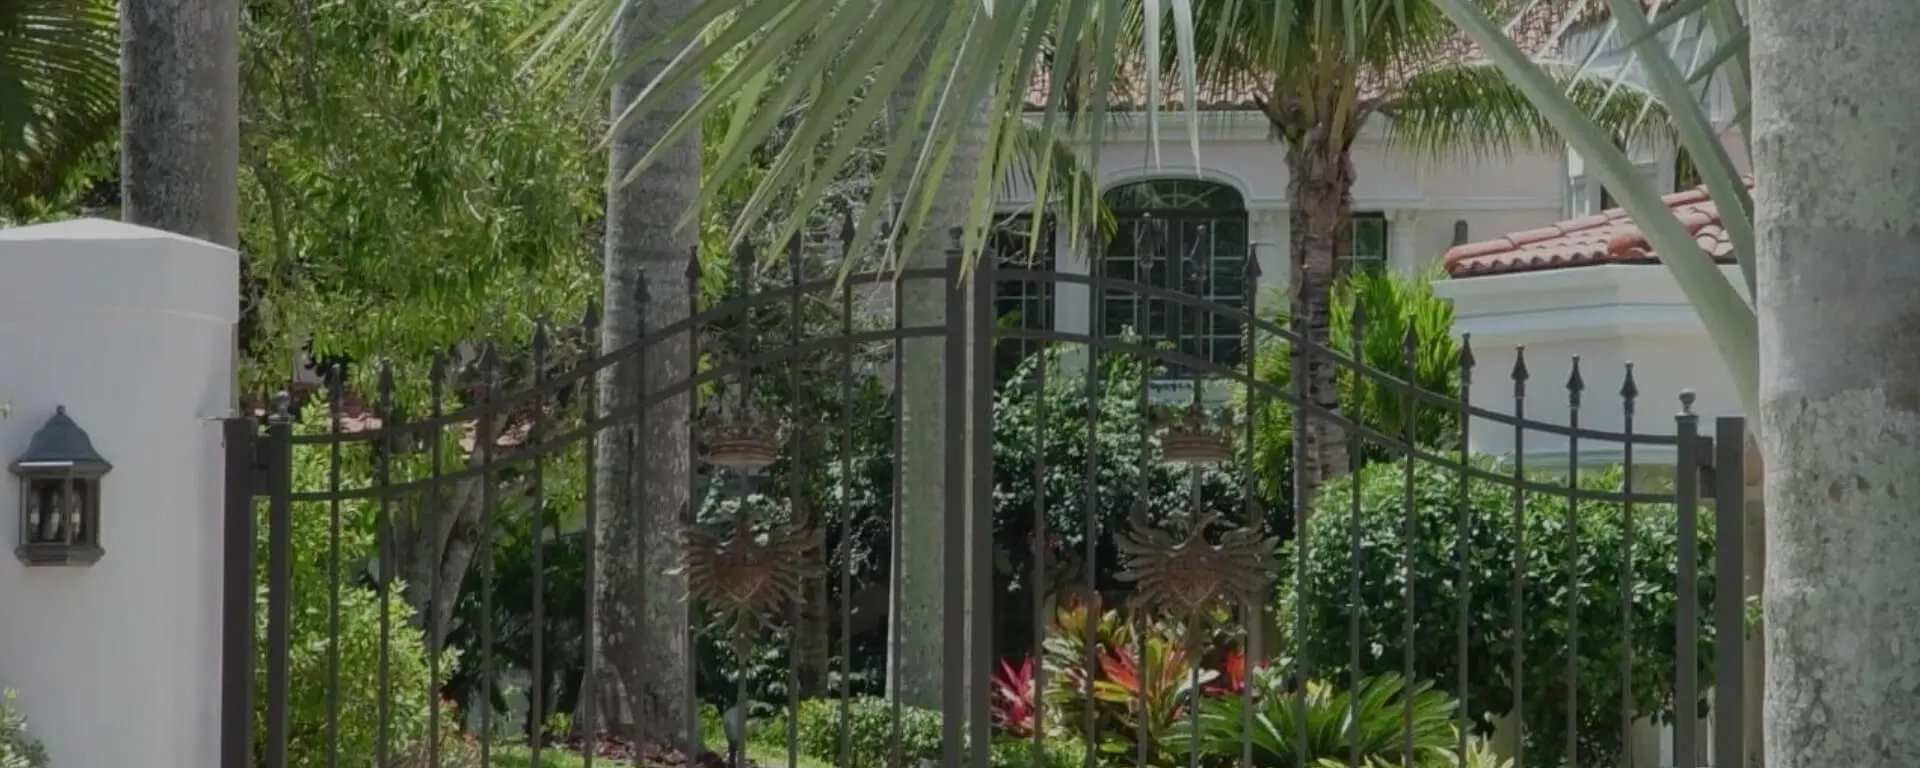 A garden with palm trees and bushes in the background.